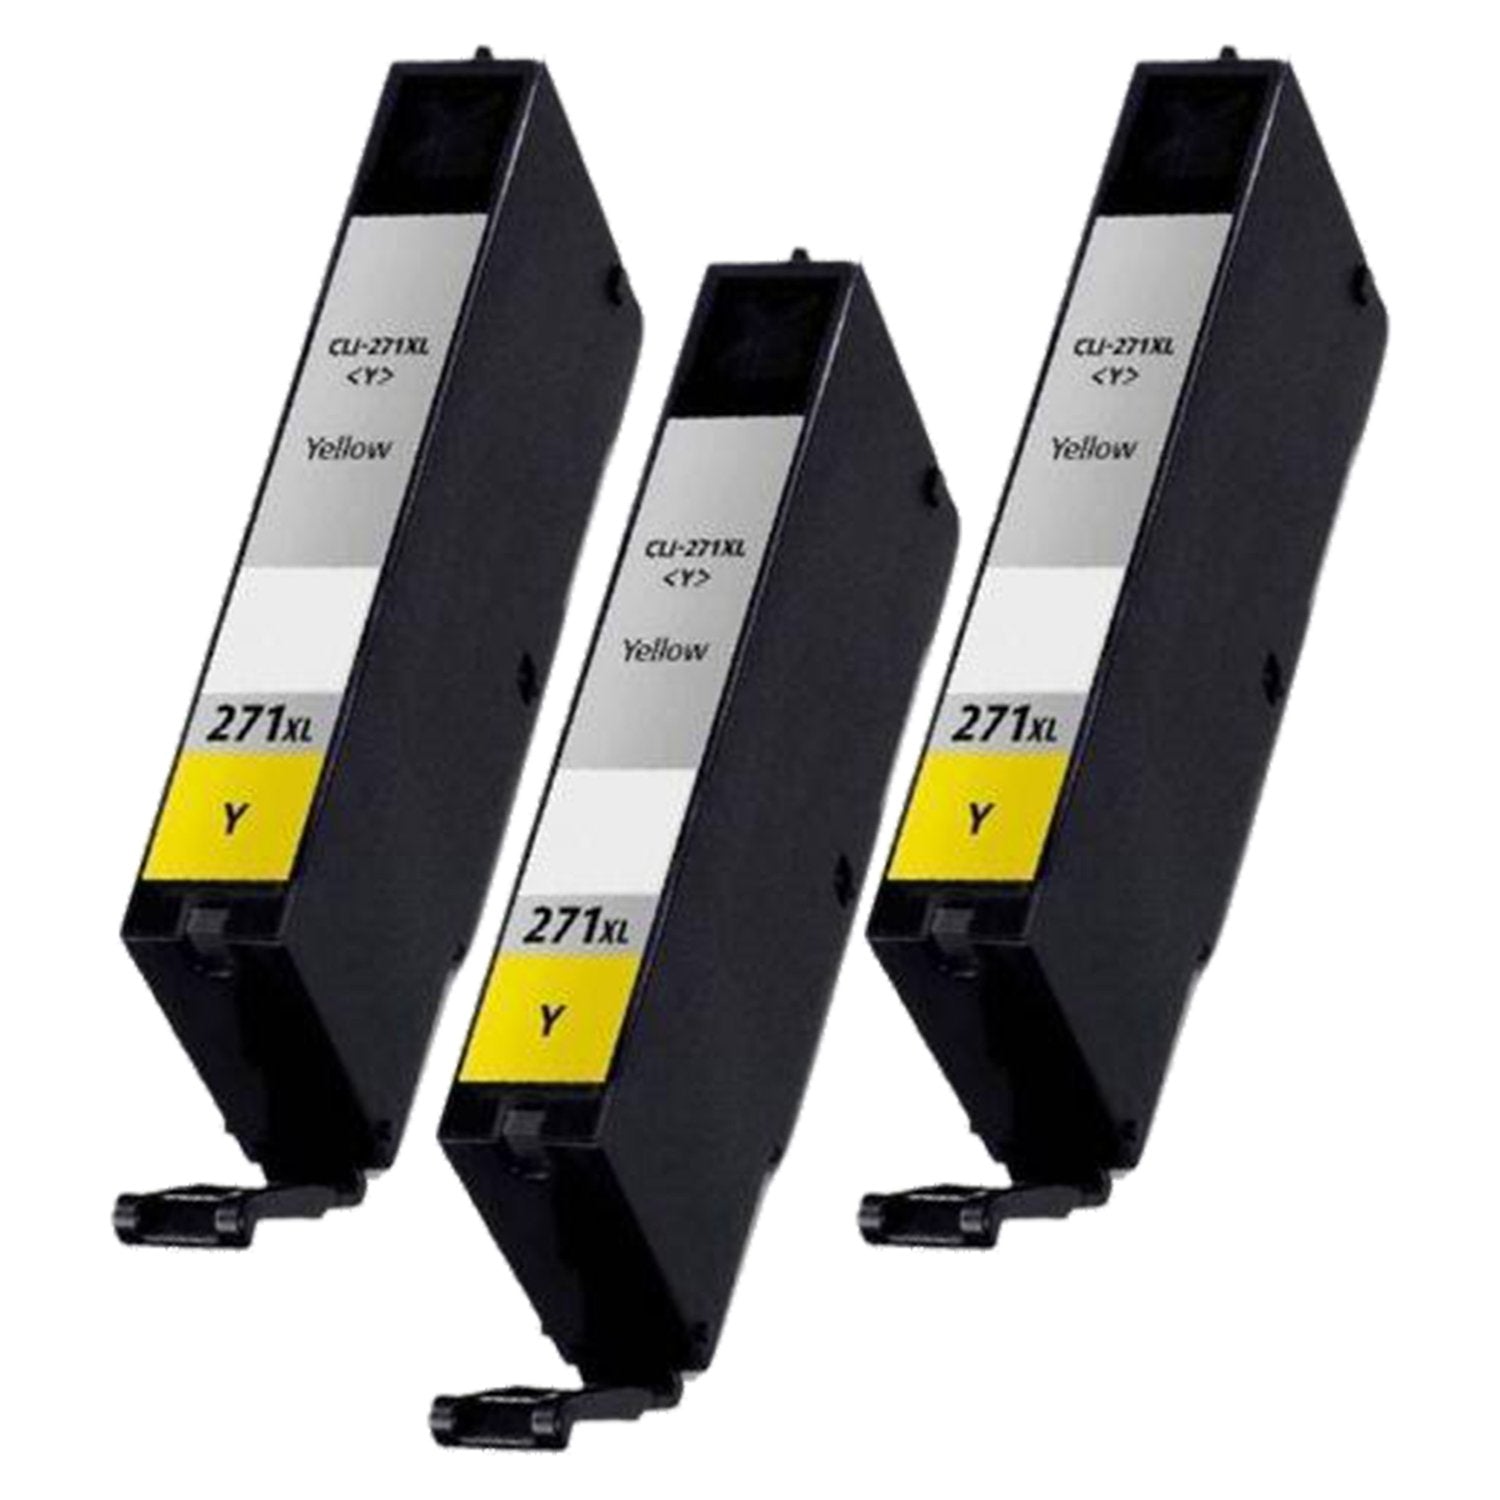 Absolute Toner Compatible Canon CLI-271XL (0339C001) High Yield Ink Cartridge Yellow | Absolute Toner Canon Ink Cartridges